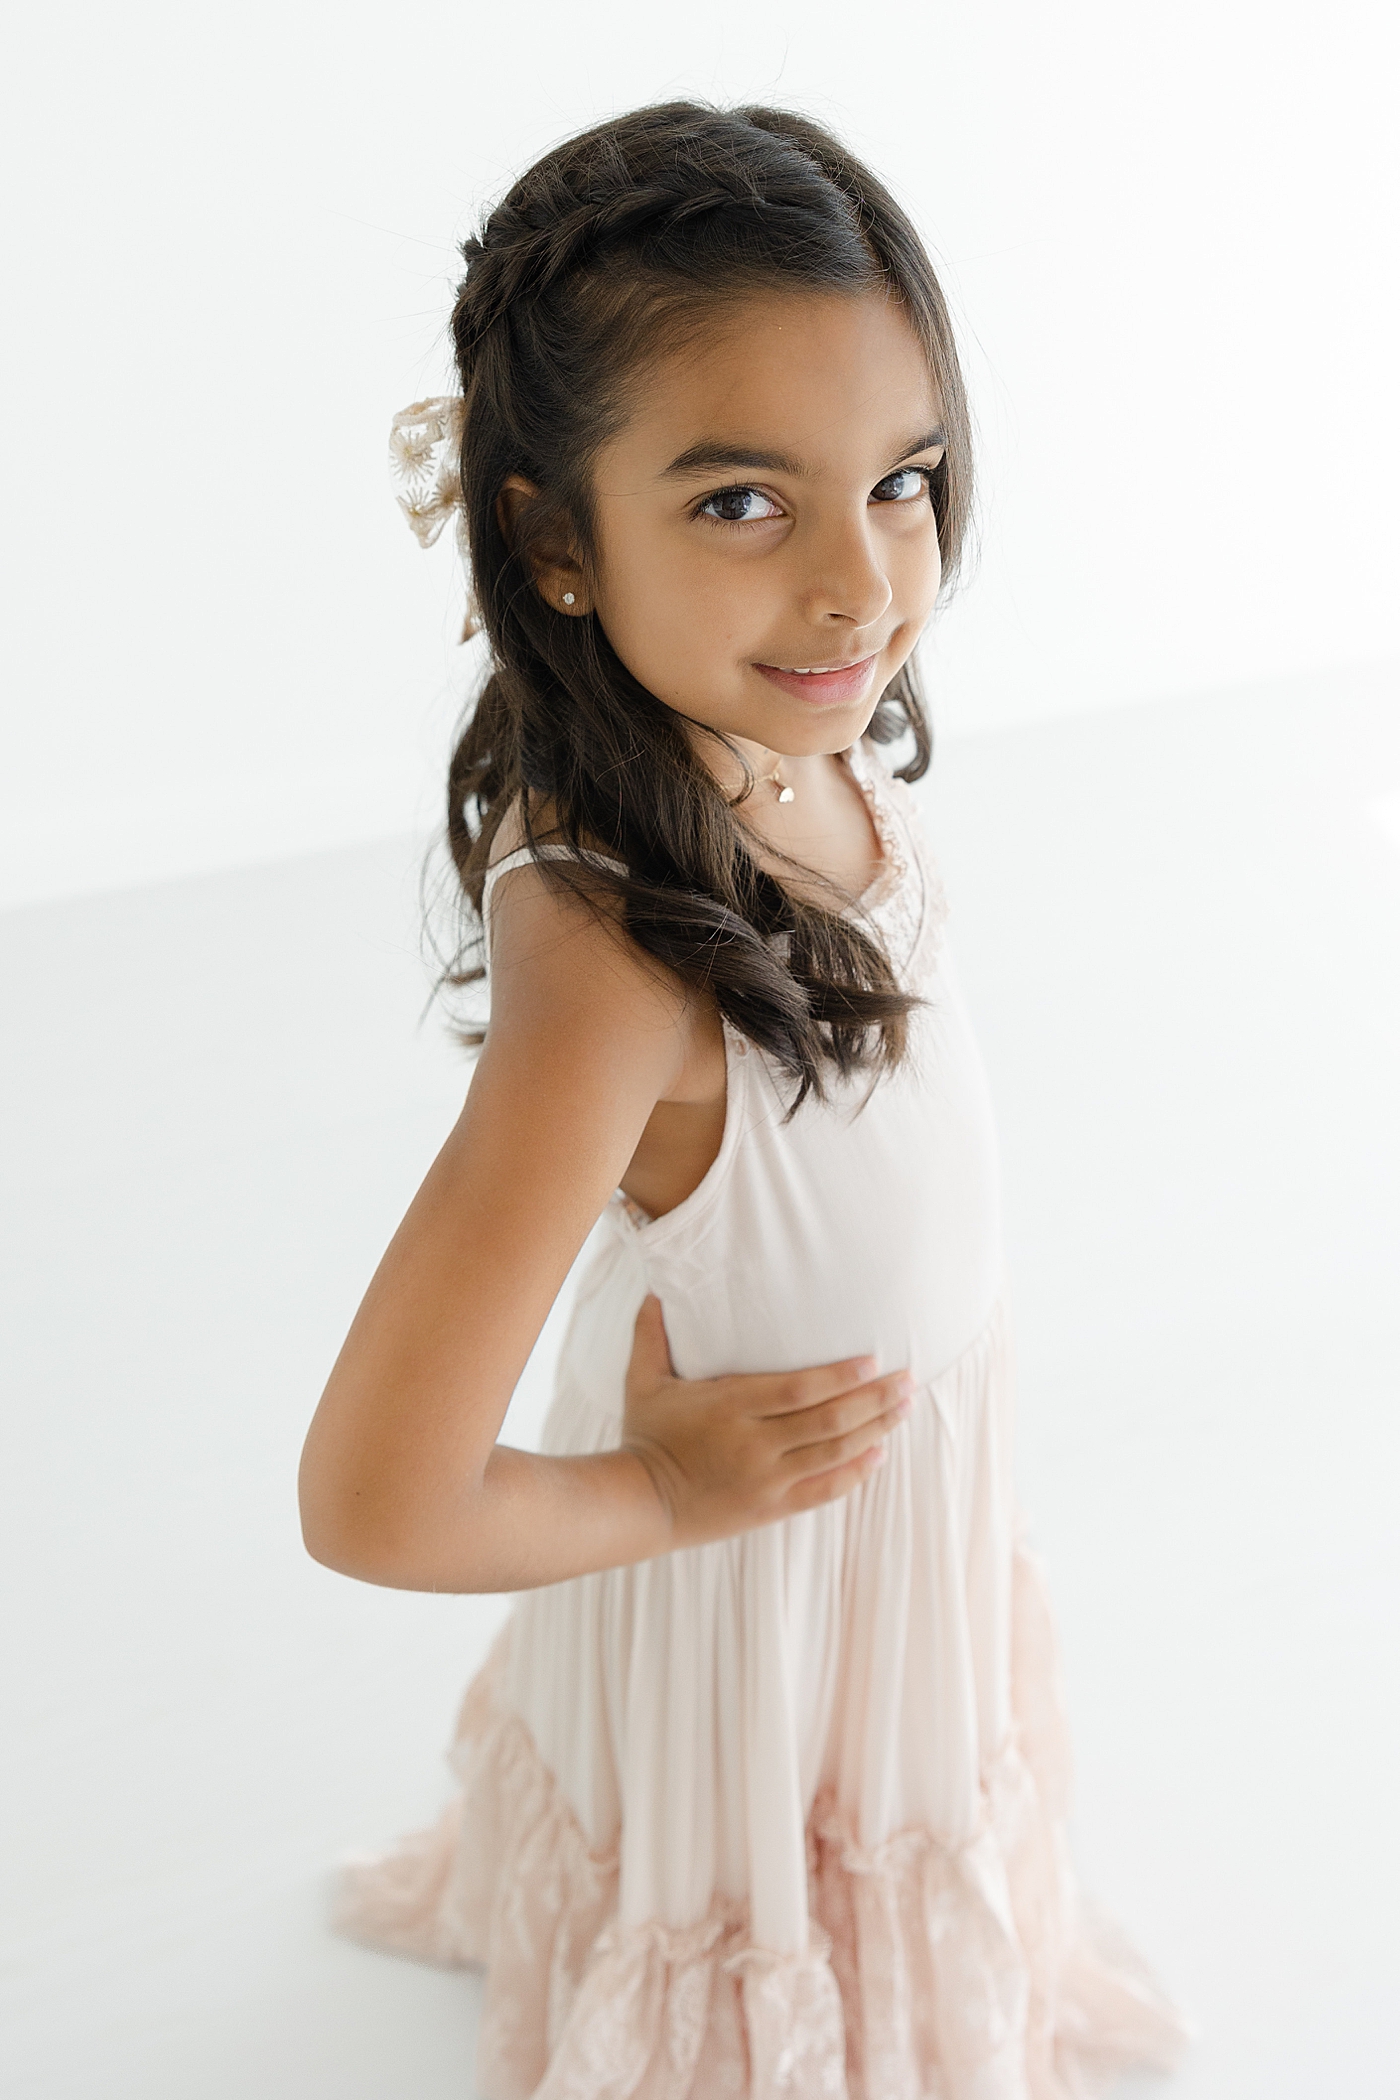 Little girl with brown hair in a pink maxi dress | Image by Sana Ahmed Photography